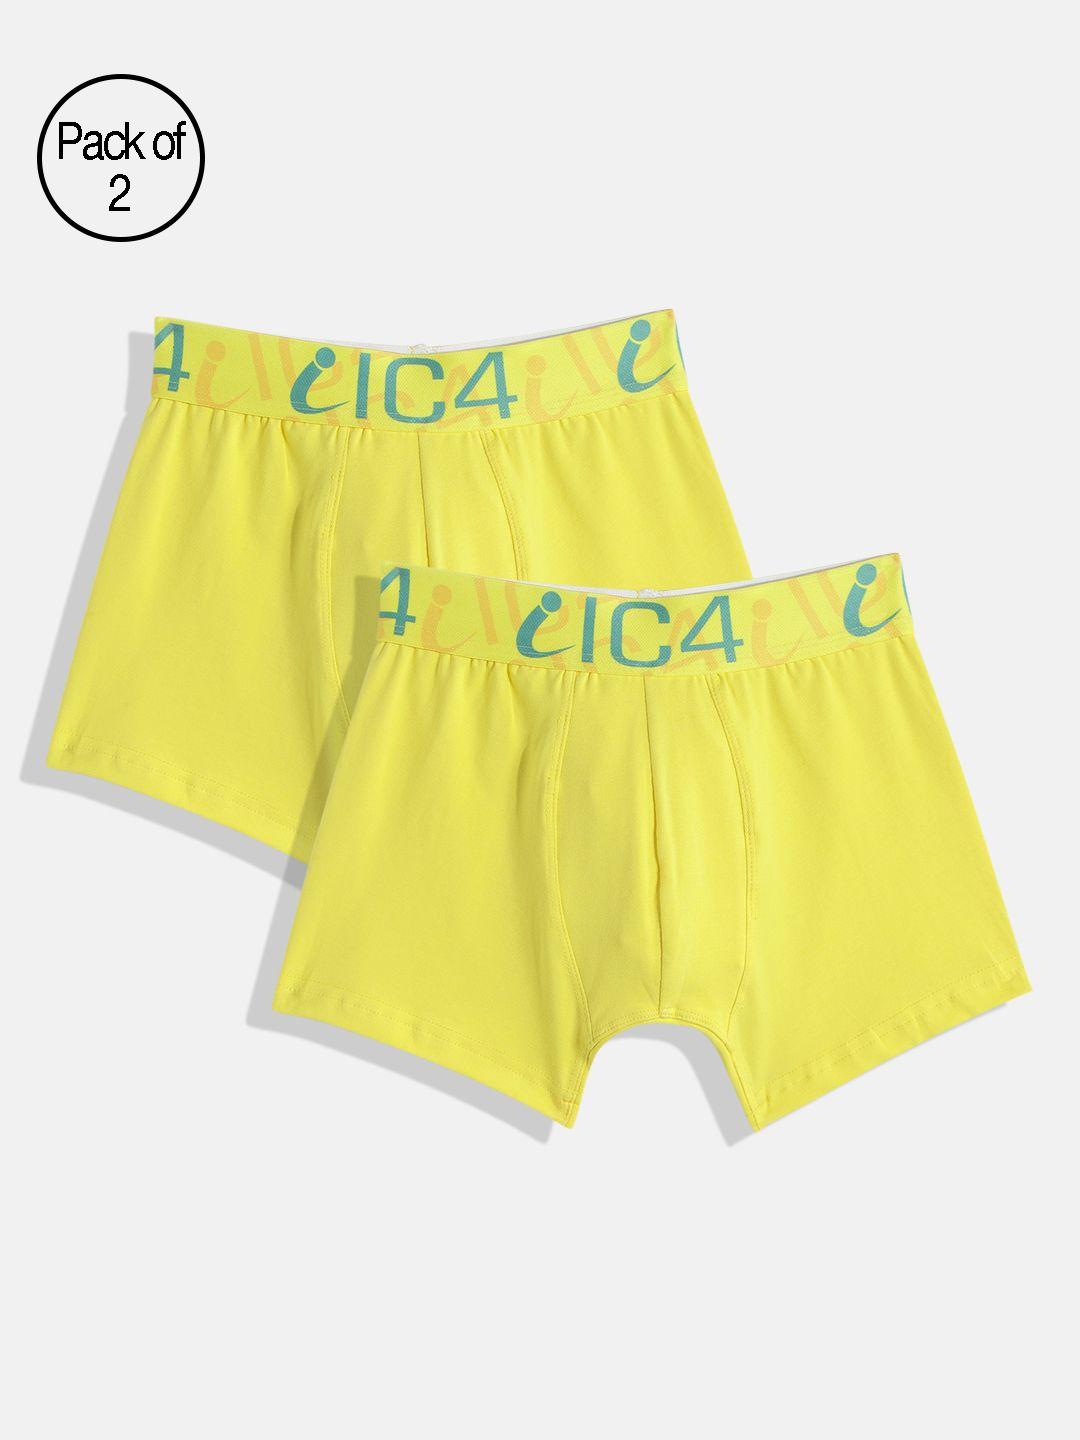 ic4 boys pack of 2 yellow solid trunks